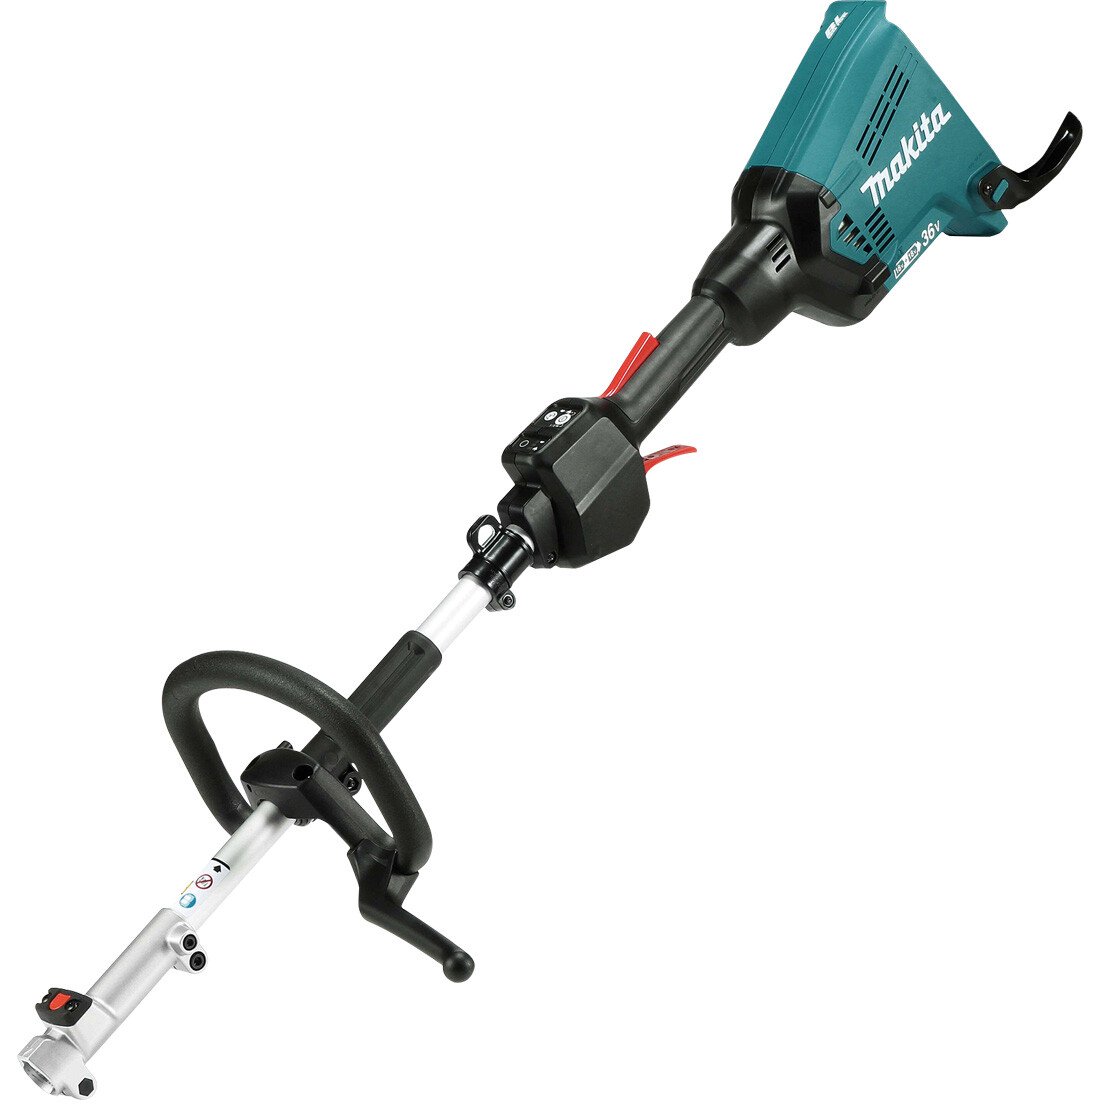 Makita DUX60PG2 Twin 18V (36V) Brushless Split-Shaft with 2x 6.0Ah Batteries and Dual Port Charger